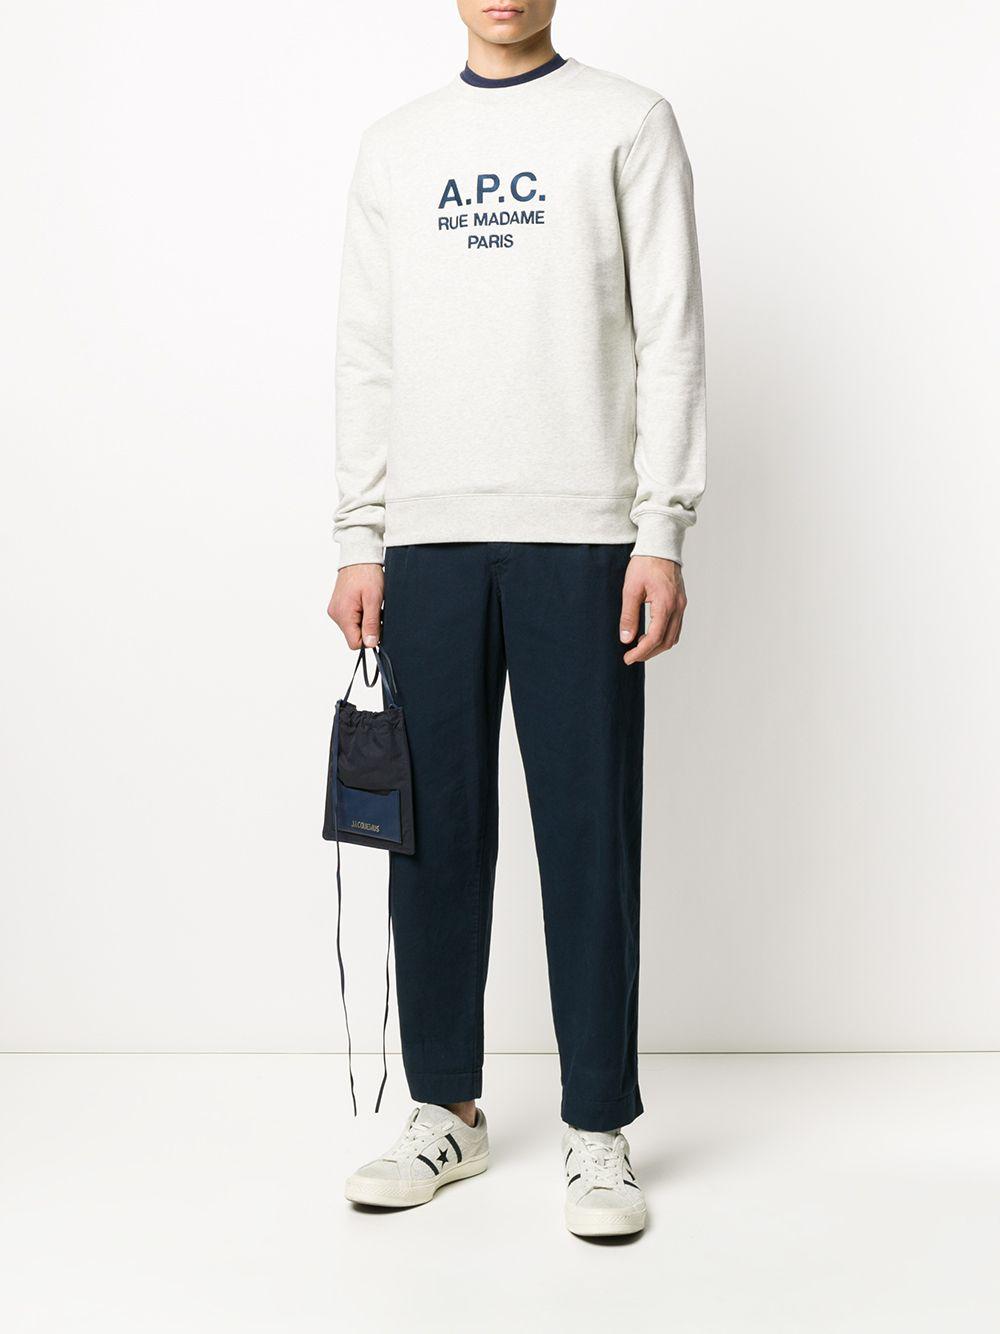 A.P.C. Cotton Embroidered Logo Sweatshirt for Men - Save 14% - Lyst